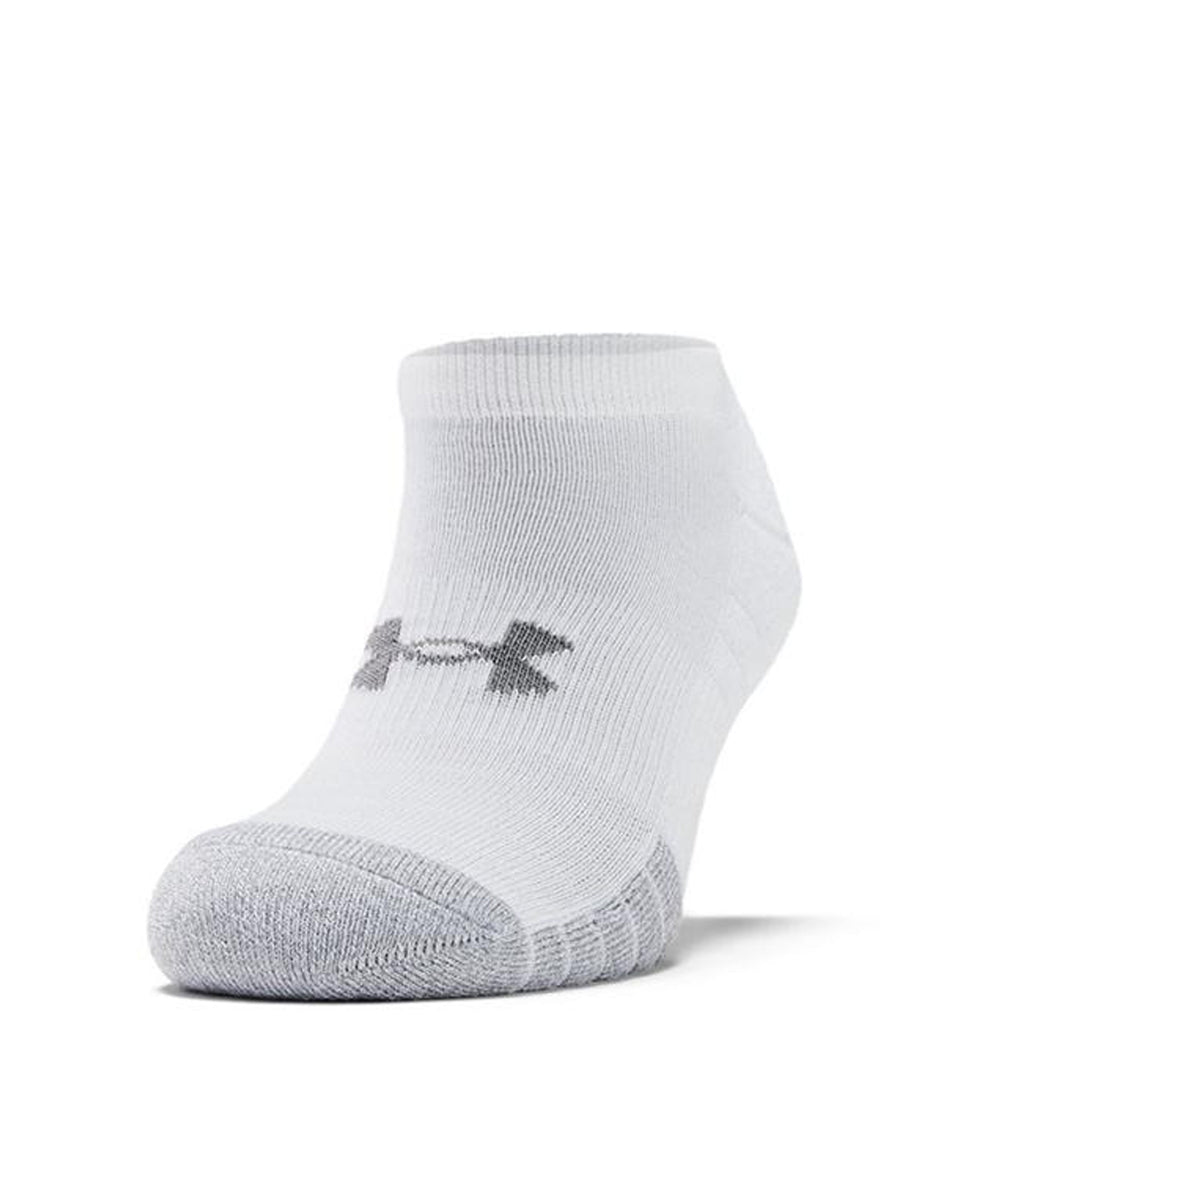 Under Armour No Show Socks 3 Pack: White